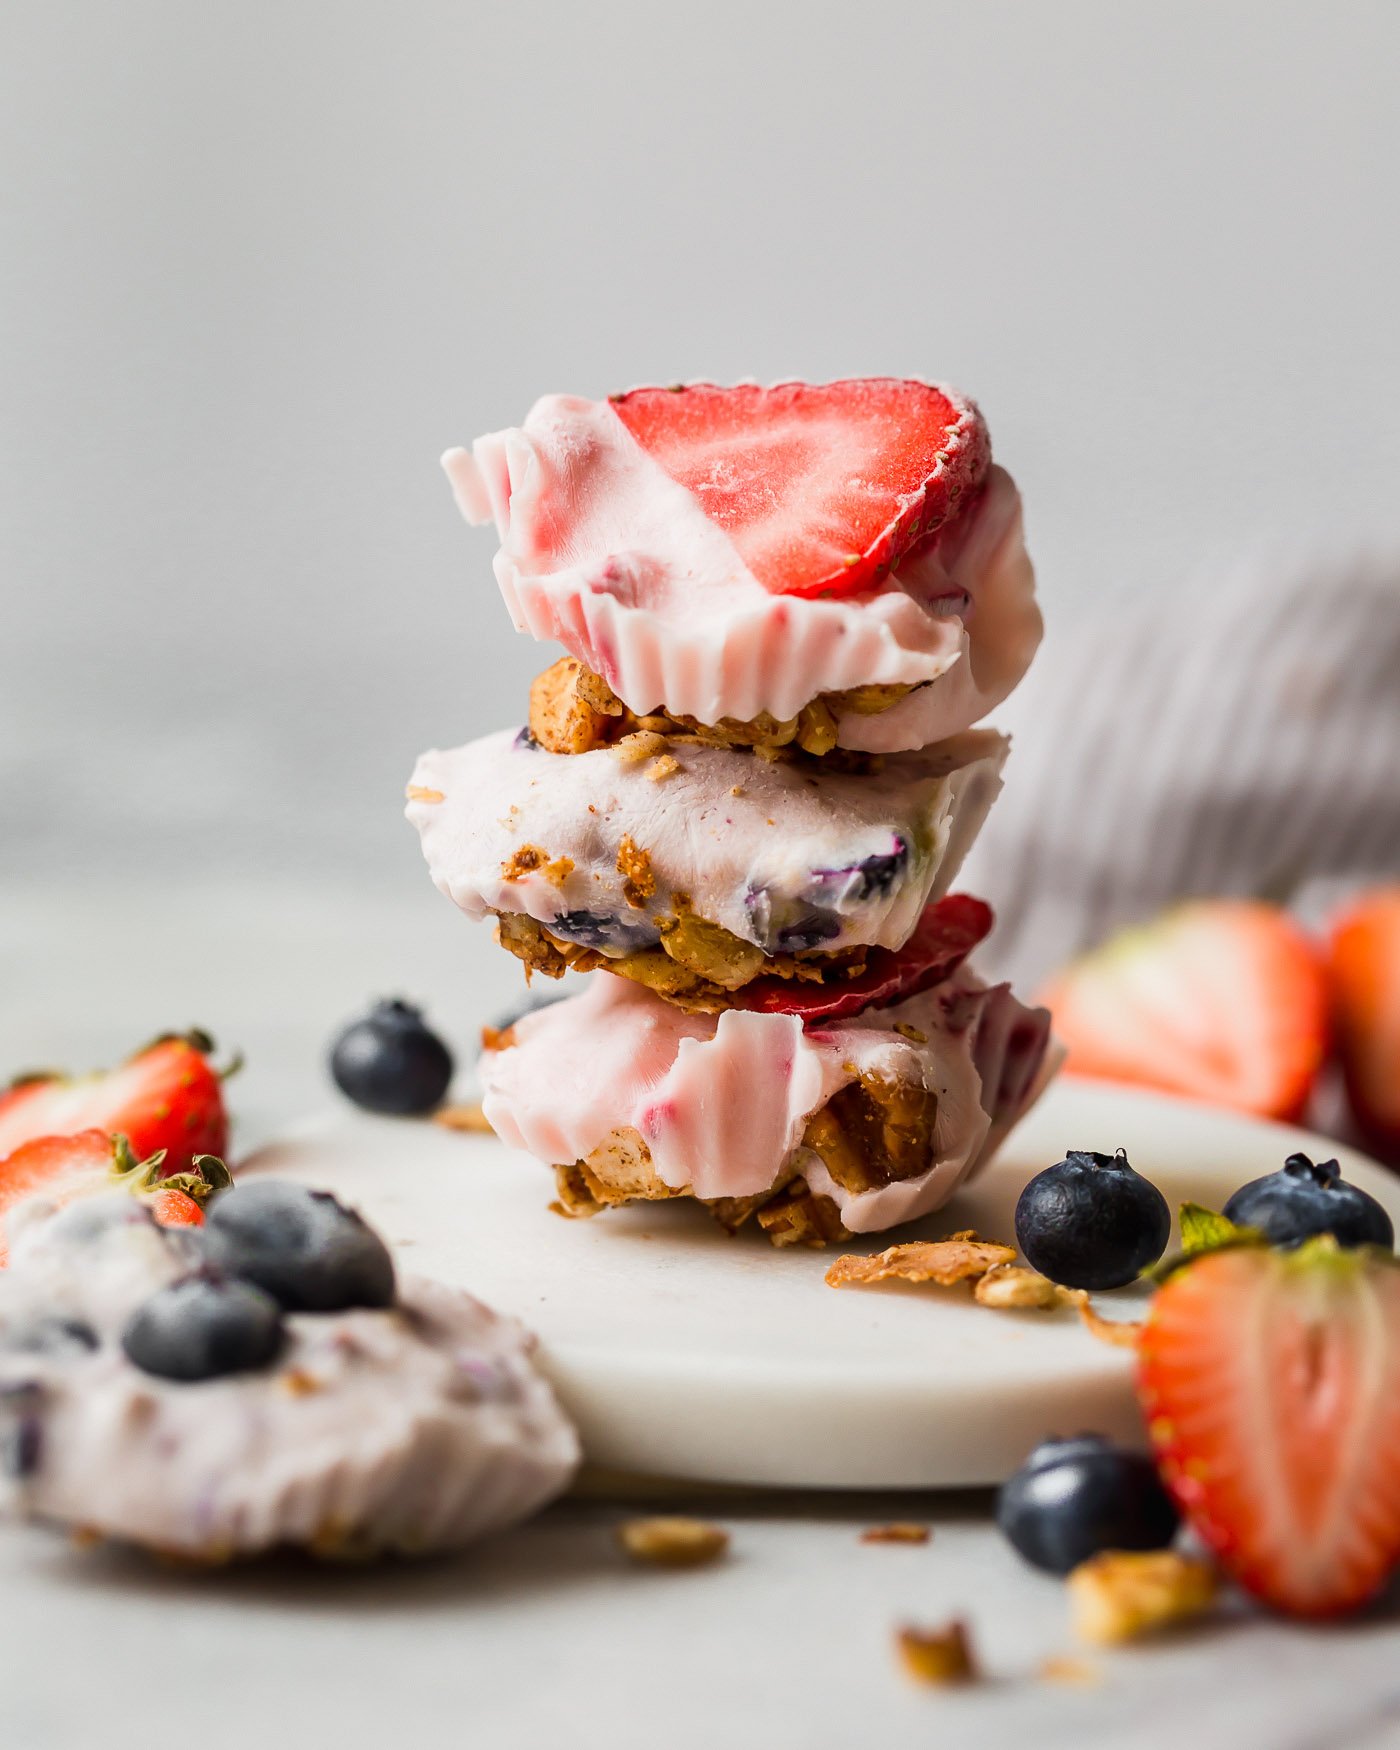 easy & healthy frozen yogurt bites call for only 5 ingredients and 10 minutes of active prep time! with wholesome ingredients like greek yogurt, fruit, honey, and your favorite granola, these frozen yogurt bites are as healthy as they are delicious - the best little treat to keep in your freezer this summer! #playswellwithbutter #frozenyogurtbites #frozenyogurt #greekyogurt #healthysnack #glutenfreerecipe #summertreats #summerdesserts